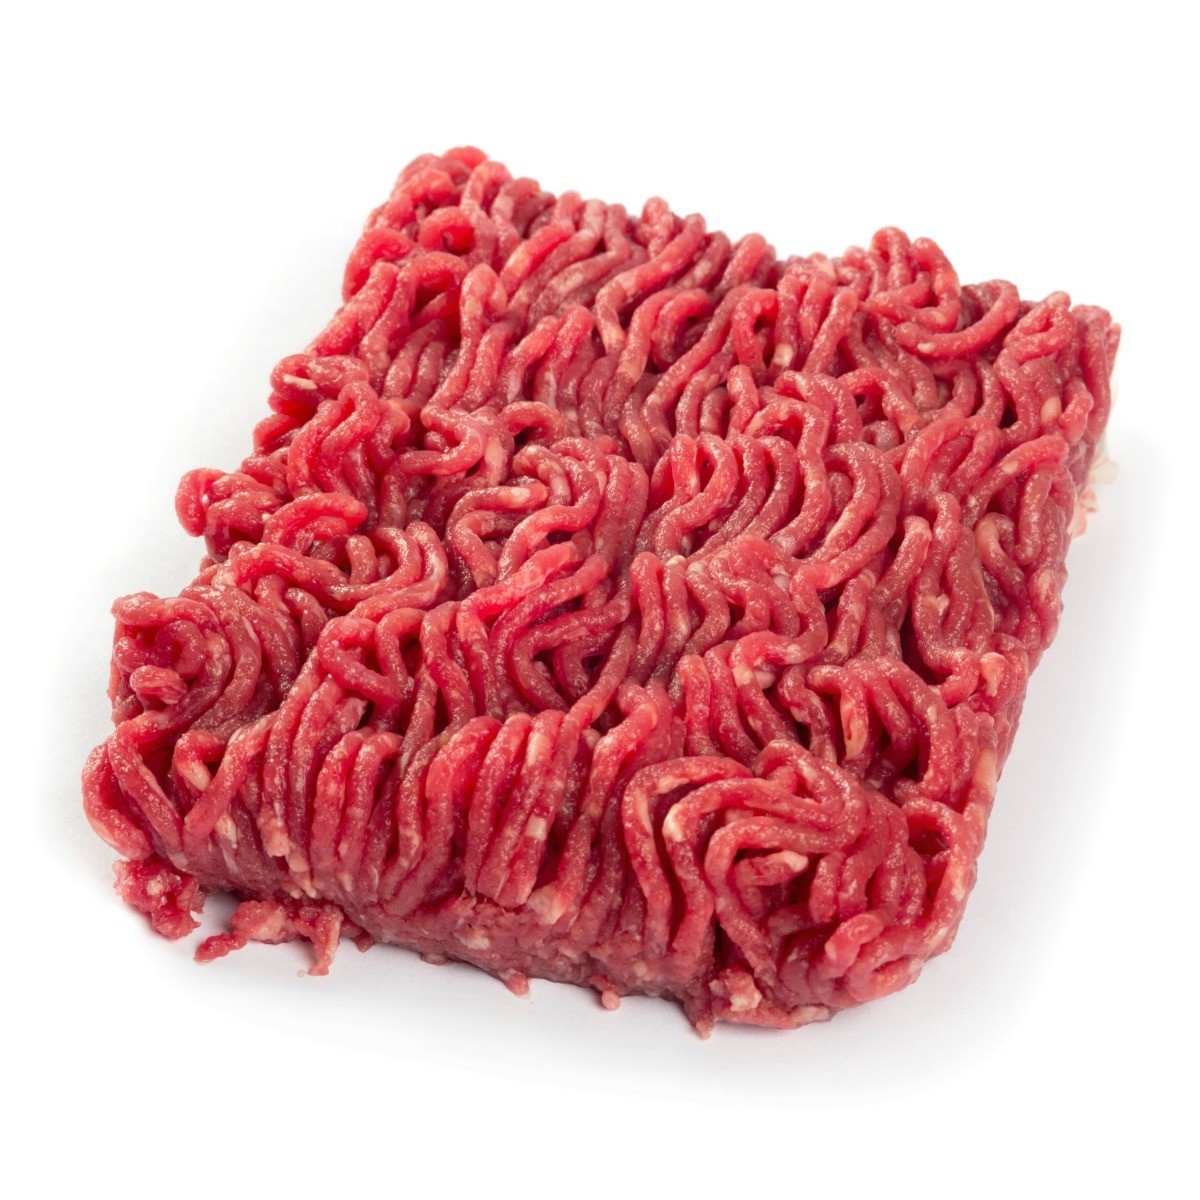 Cooking Ground Beef In Microwave
 Cooking Ground Beef in the Microwave